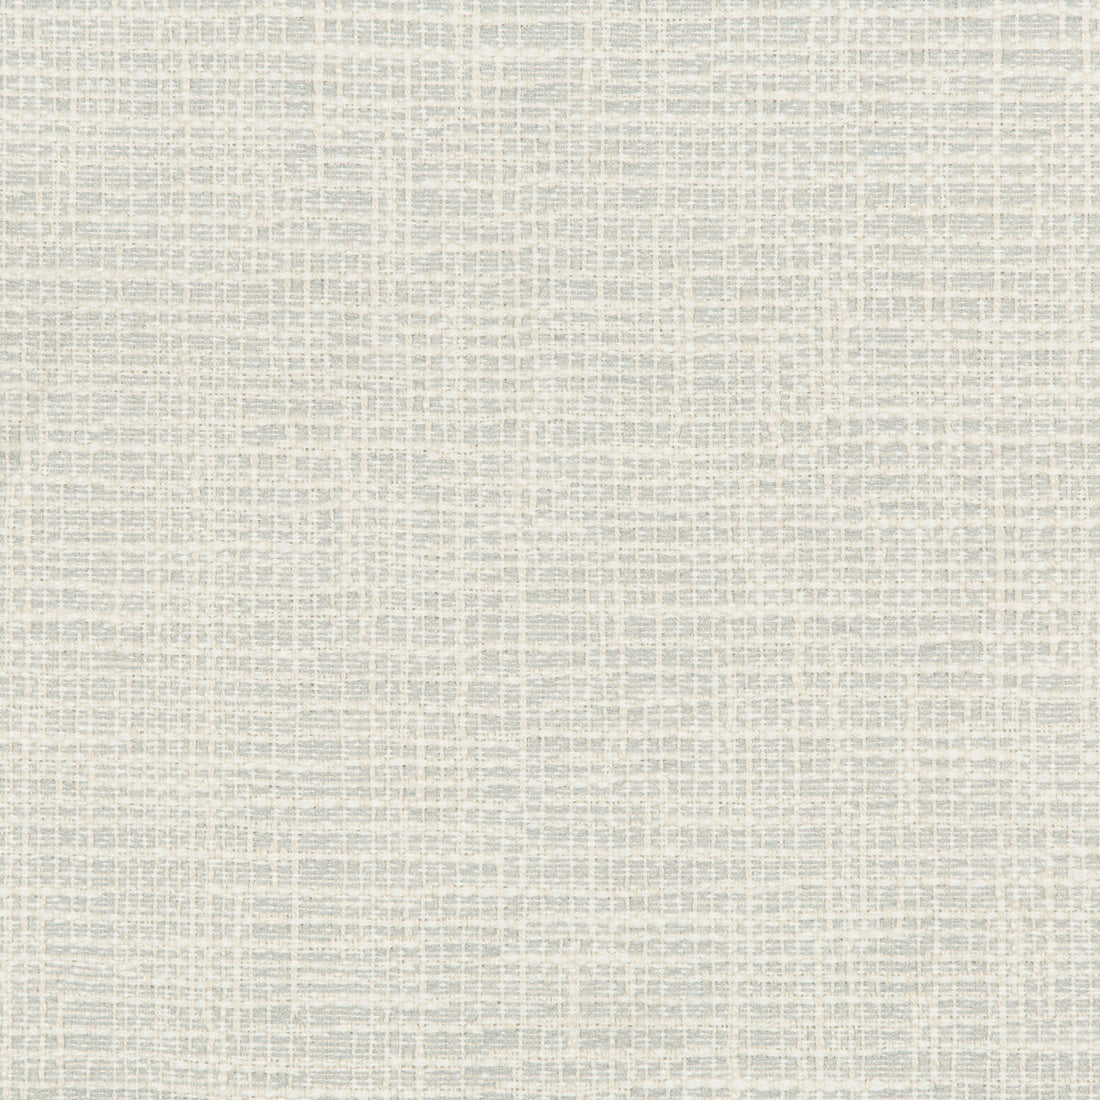 Kravet Design fabric in 36083-1115 color - pattern 36083.1115.0 - by Kravet Design in the Inside Out Performance Fabrics collection